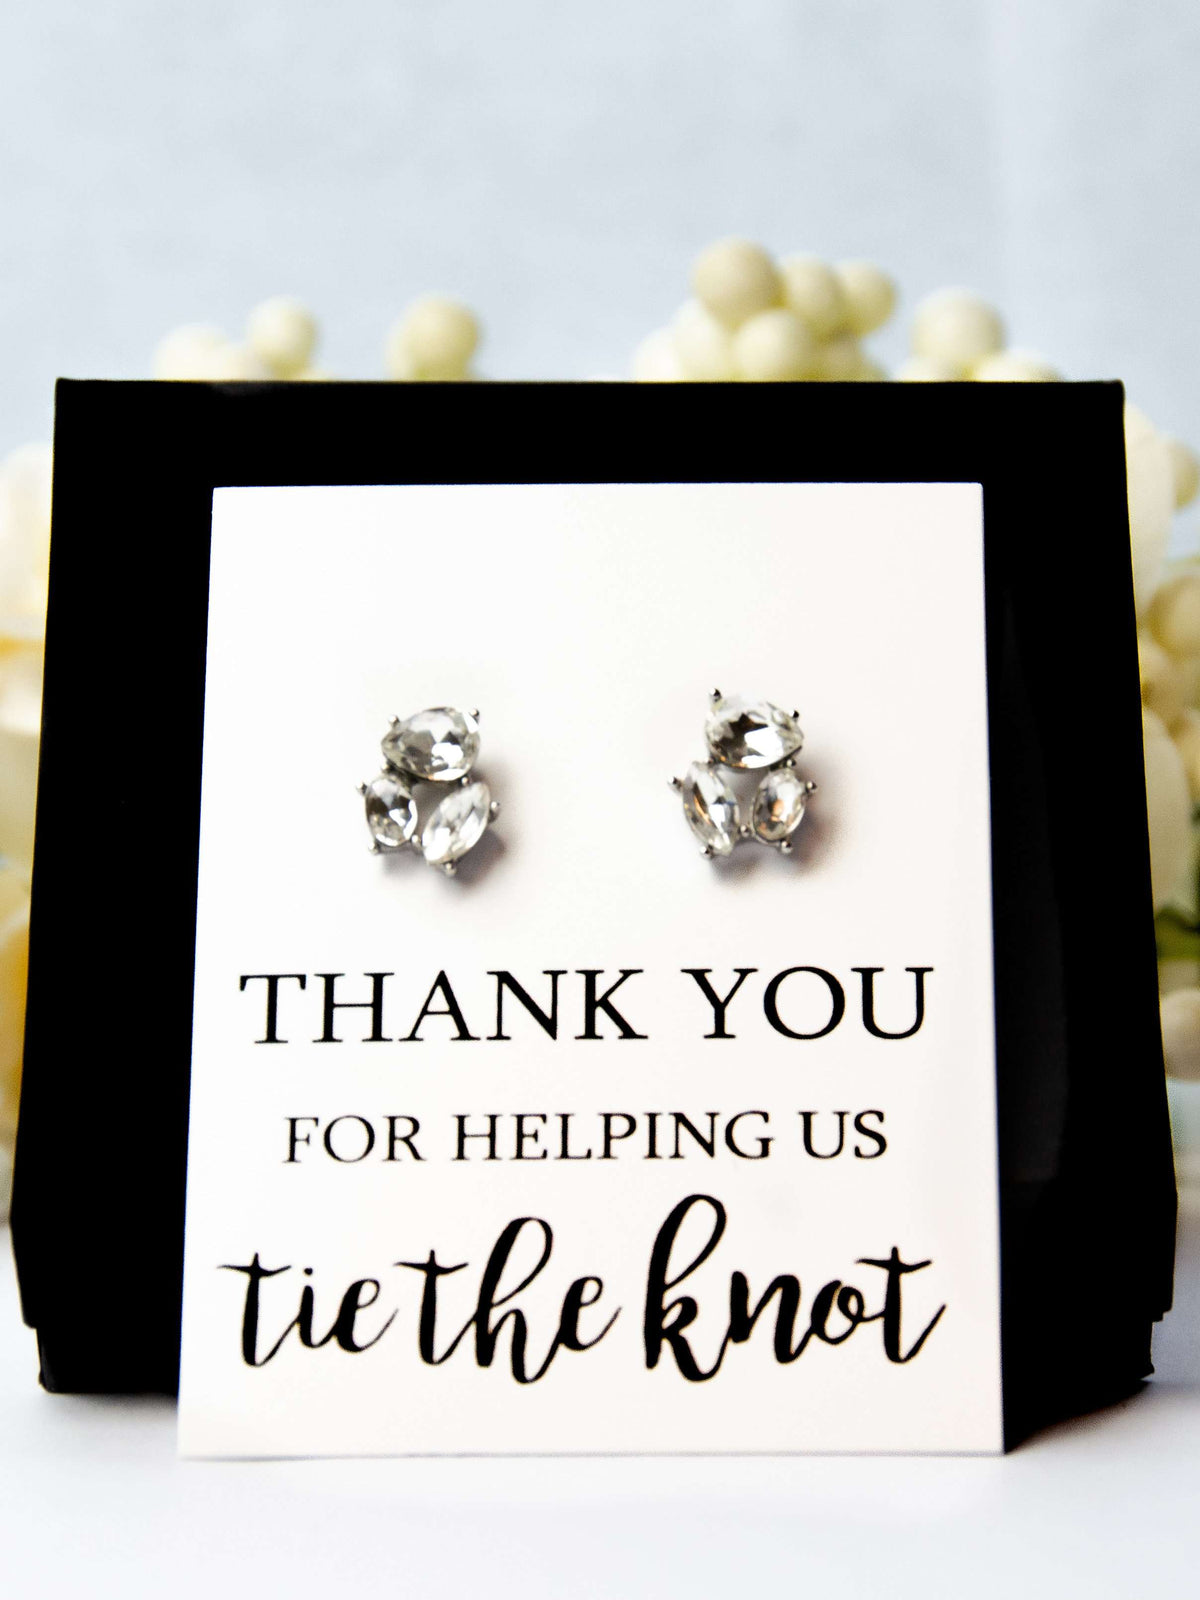 Bridal Party Tie The Knot Pearl Earrings Gift,Thank You for helping us tie the knot Bridesmaid Gift